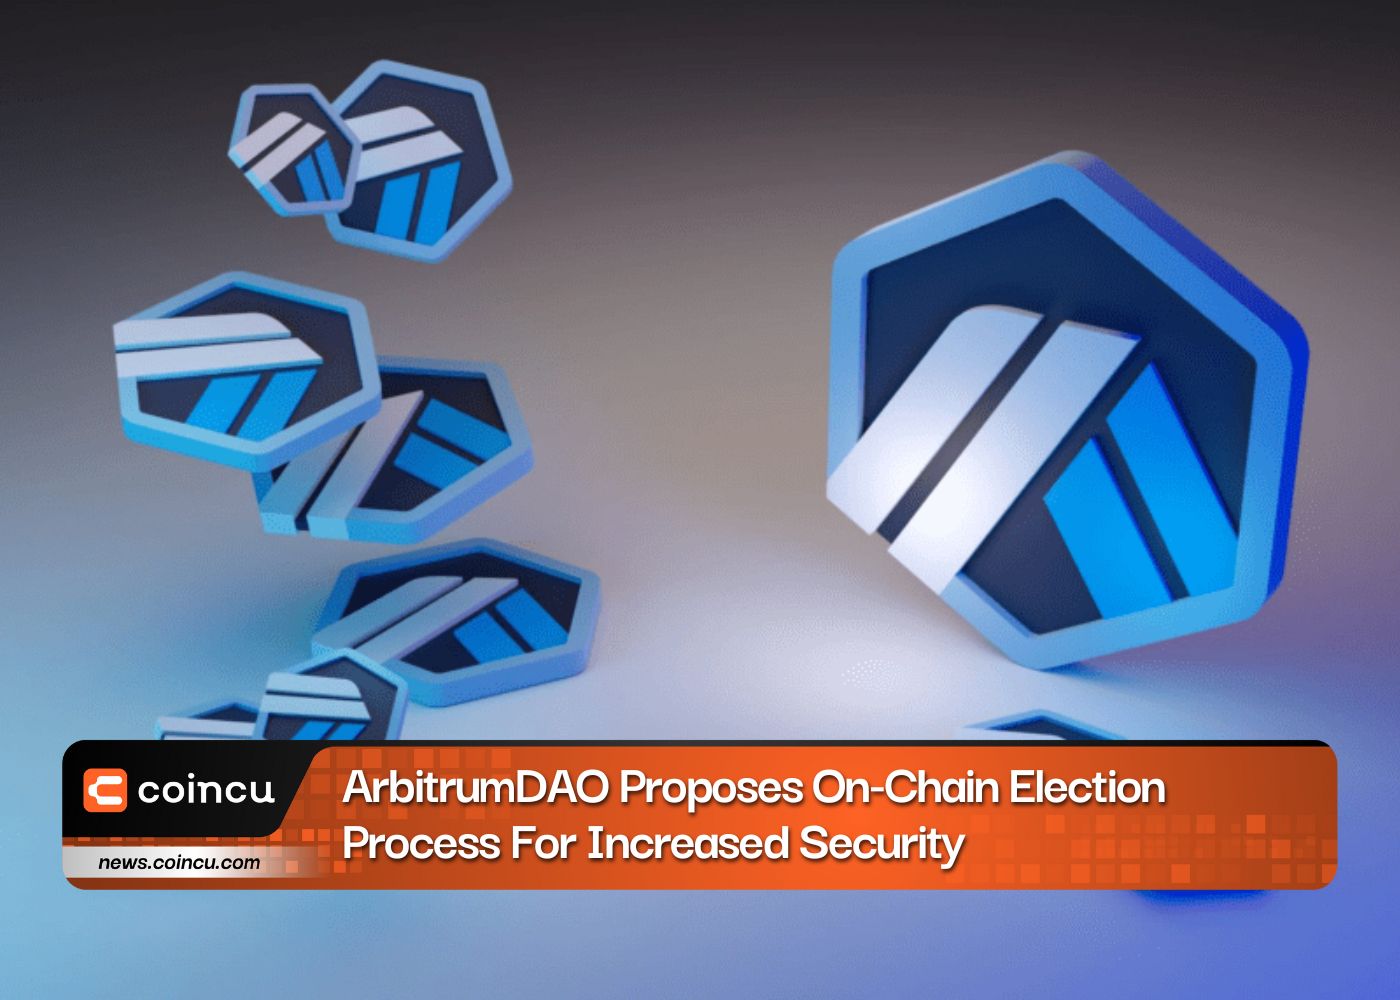 ArbitrumDAO Proposes On-Chain Election Process For Increased Security